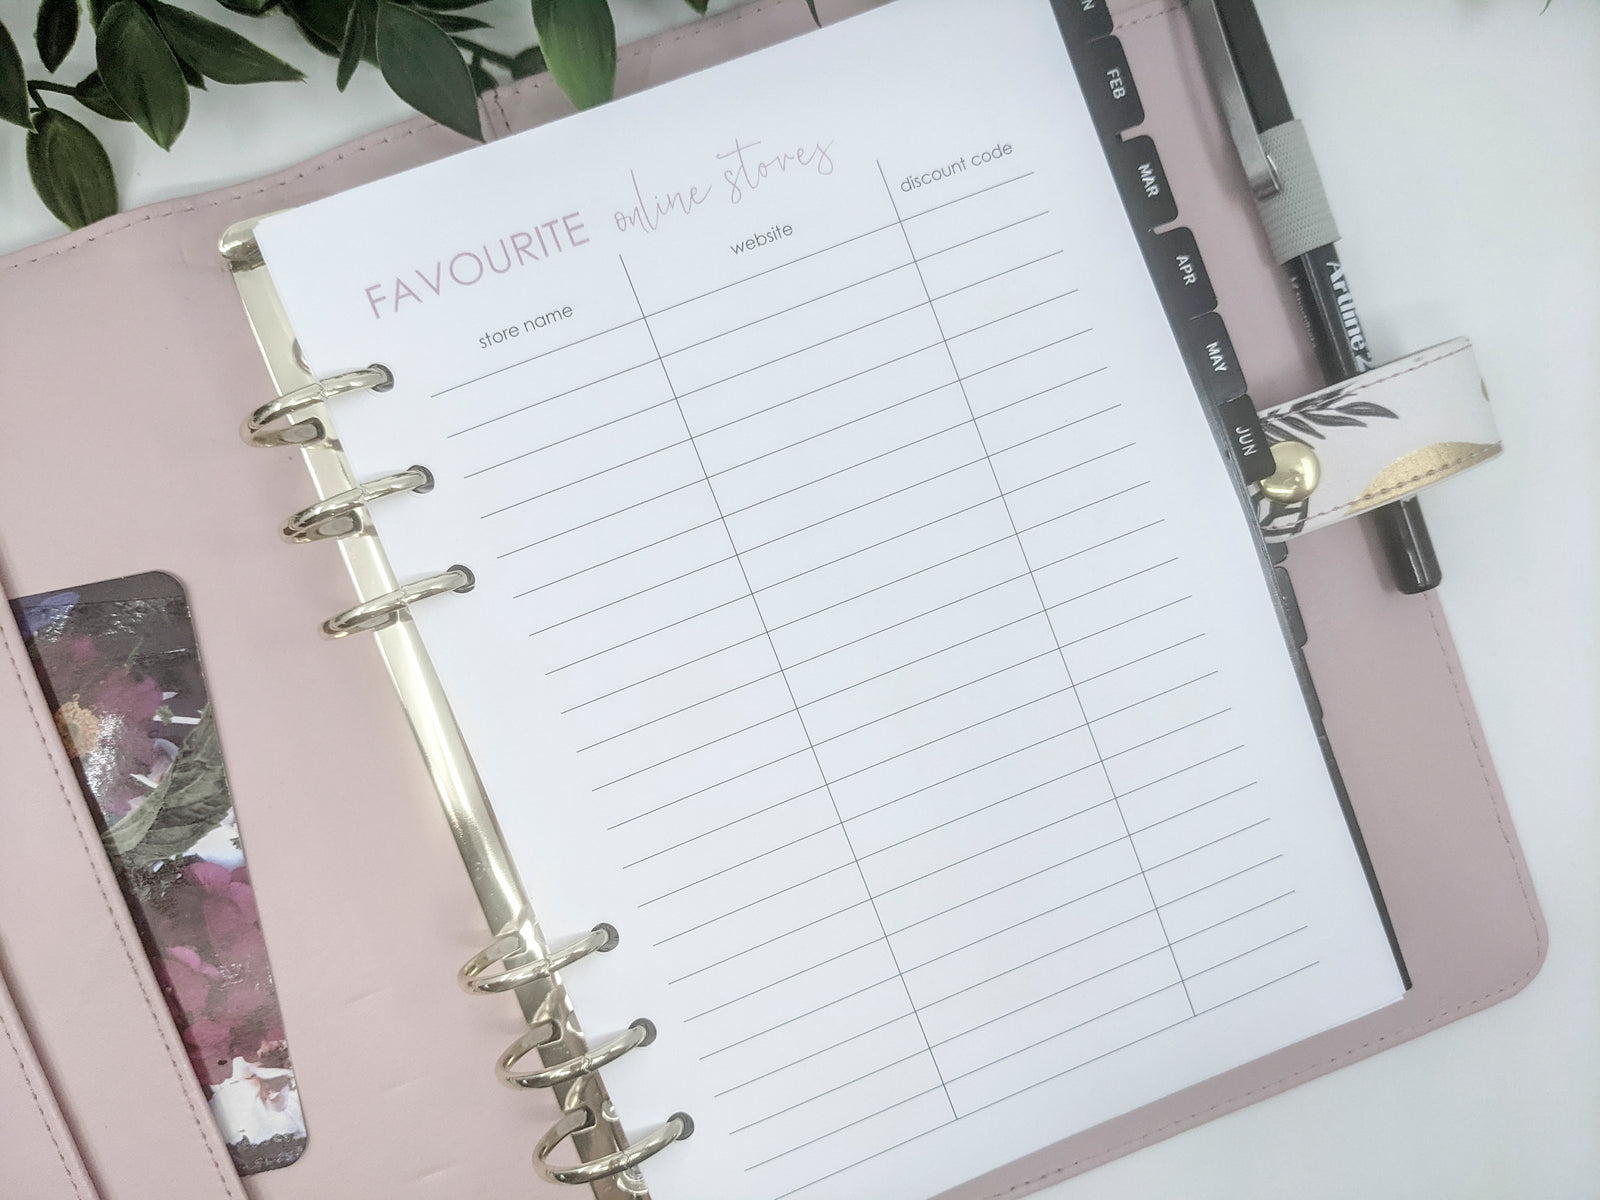 Favourite Online Stores planner inserts for A5 planners